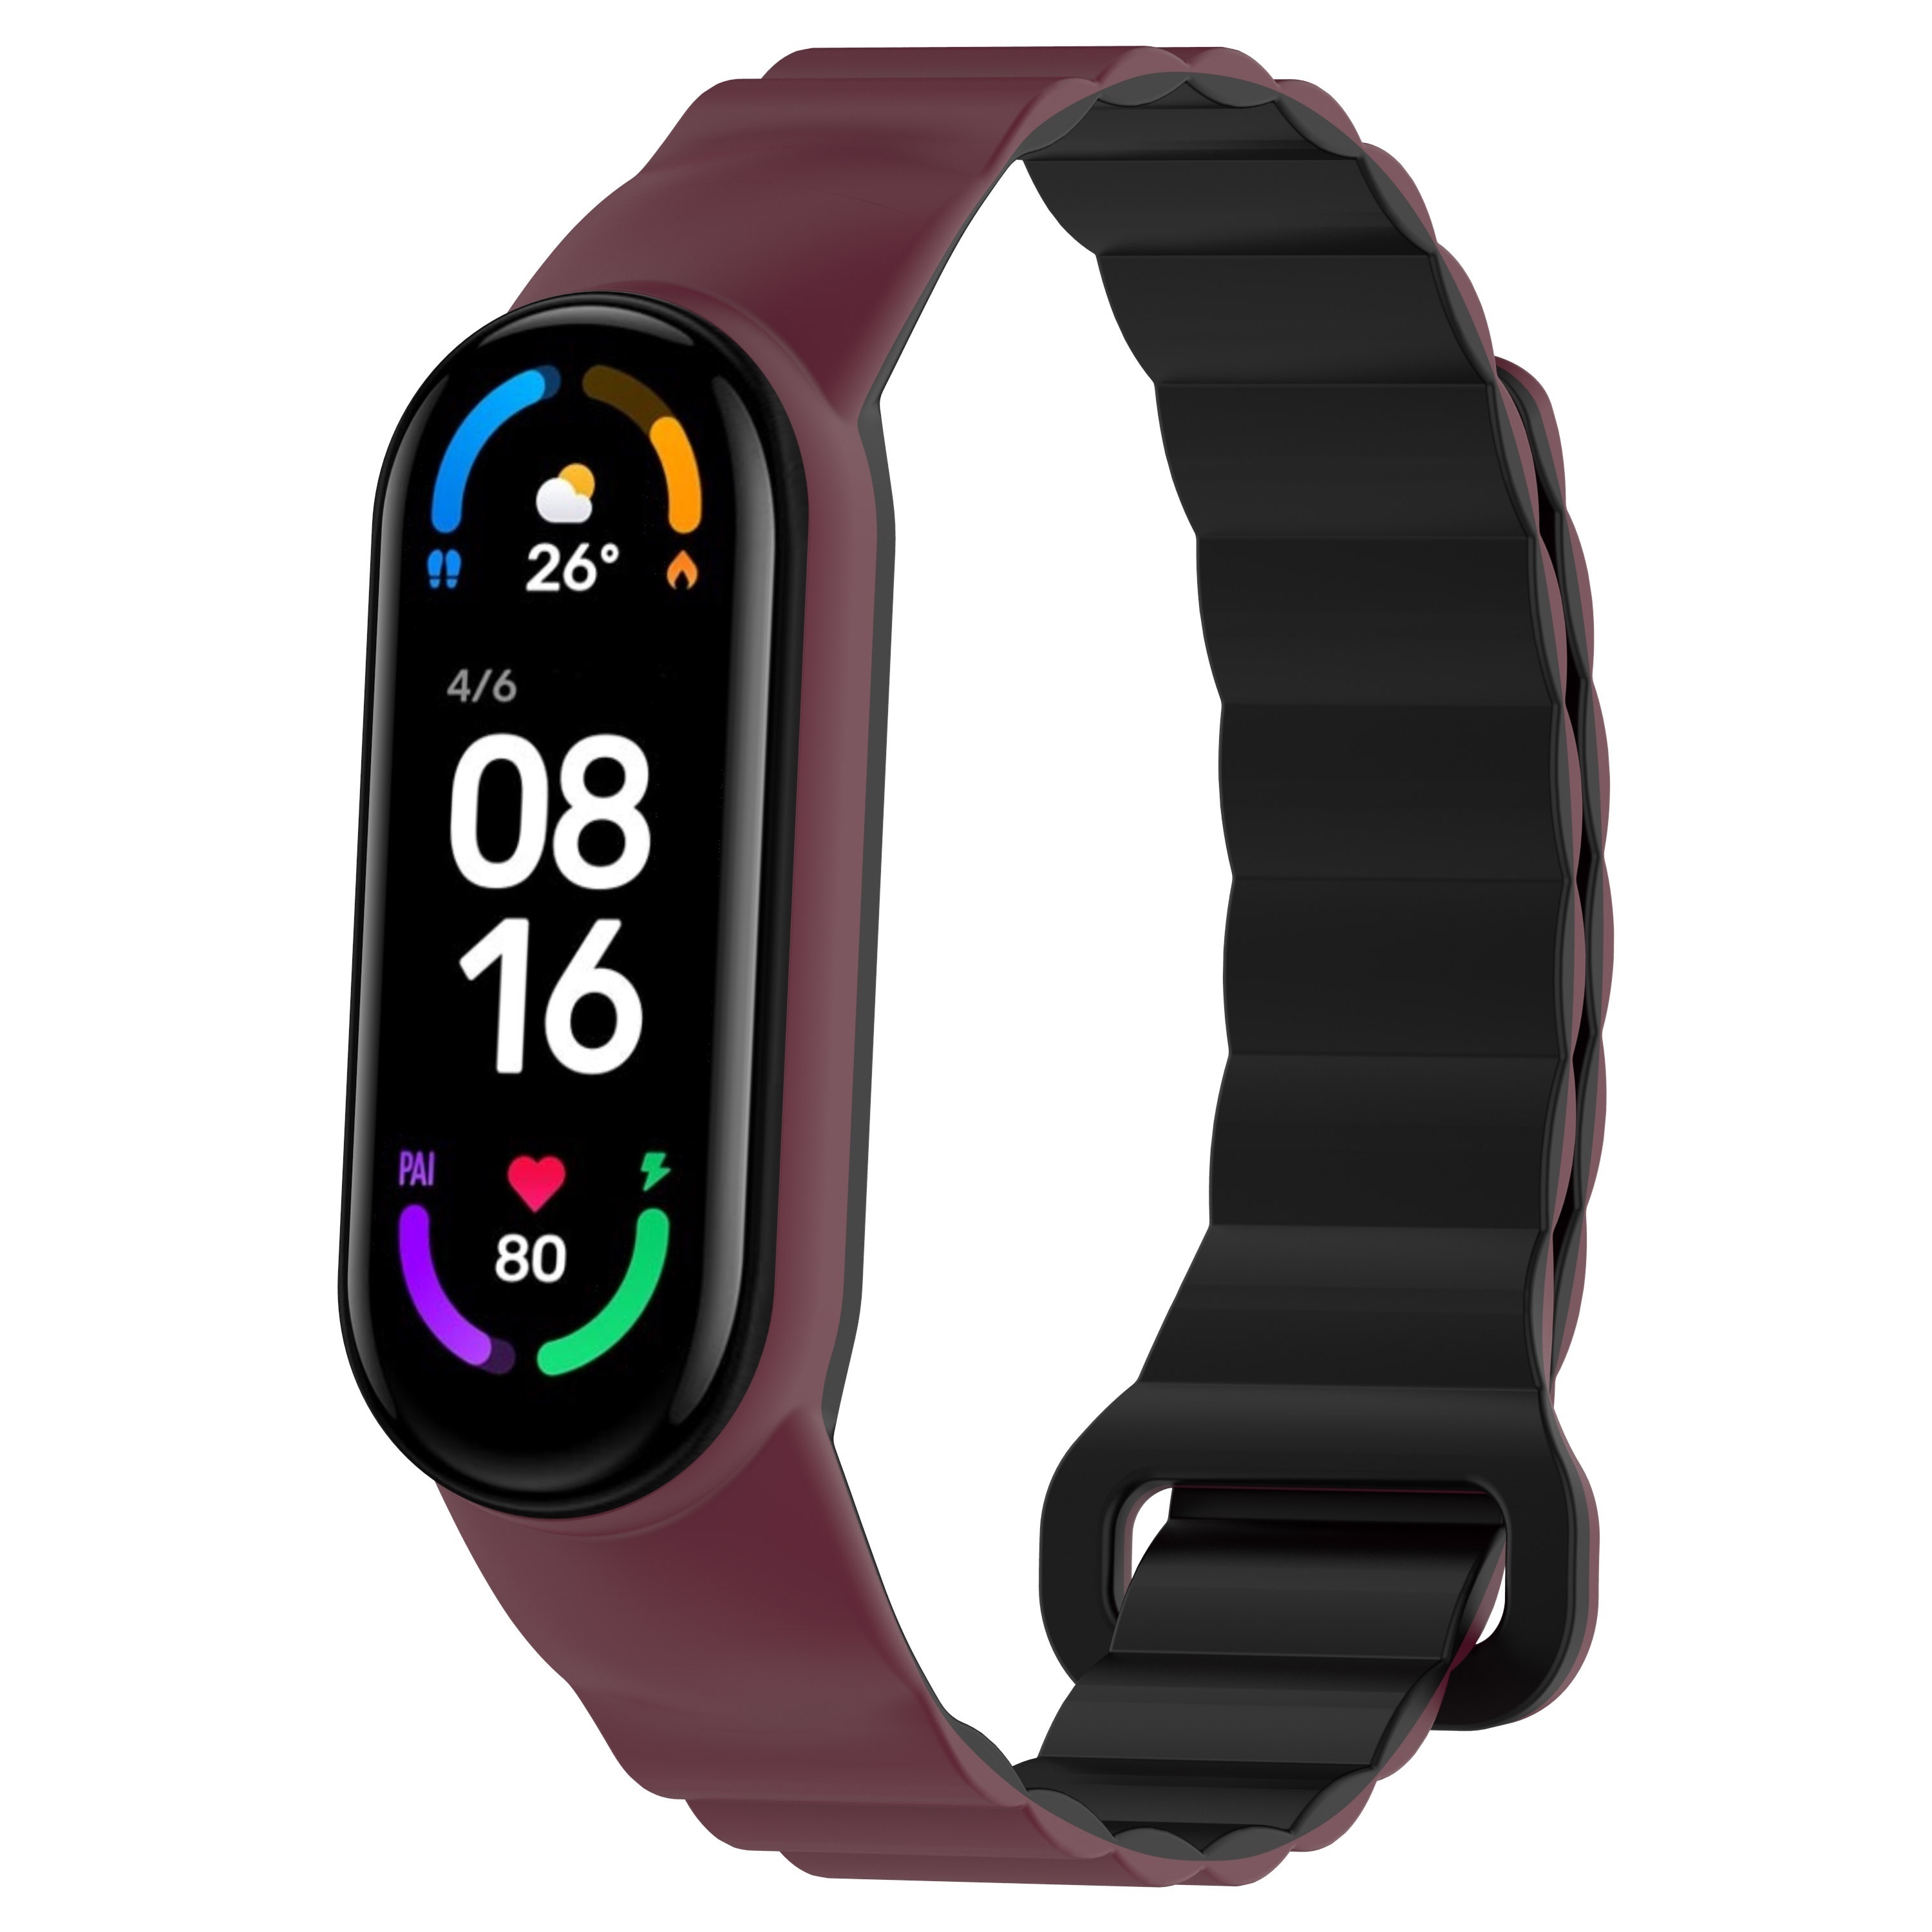 XIAOMI MI BAND 5 SMARTWATCH COLOR REPLACEMENT ACTIVITY WATCH STRAP